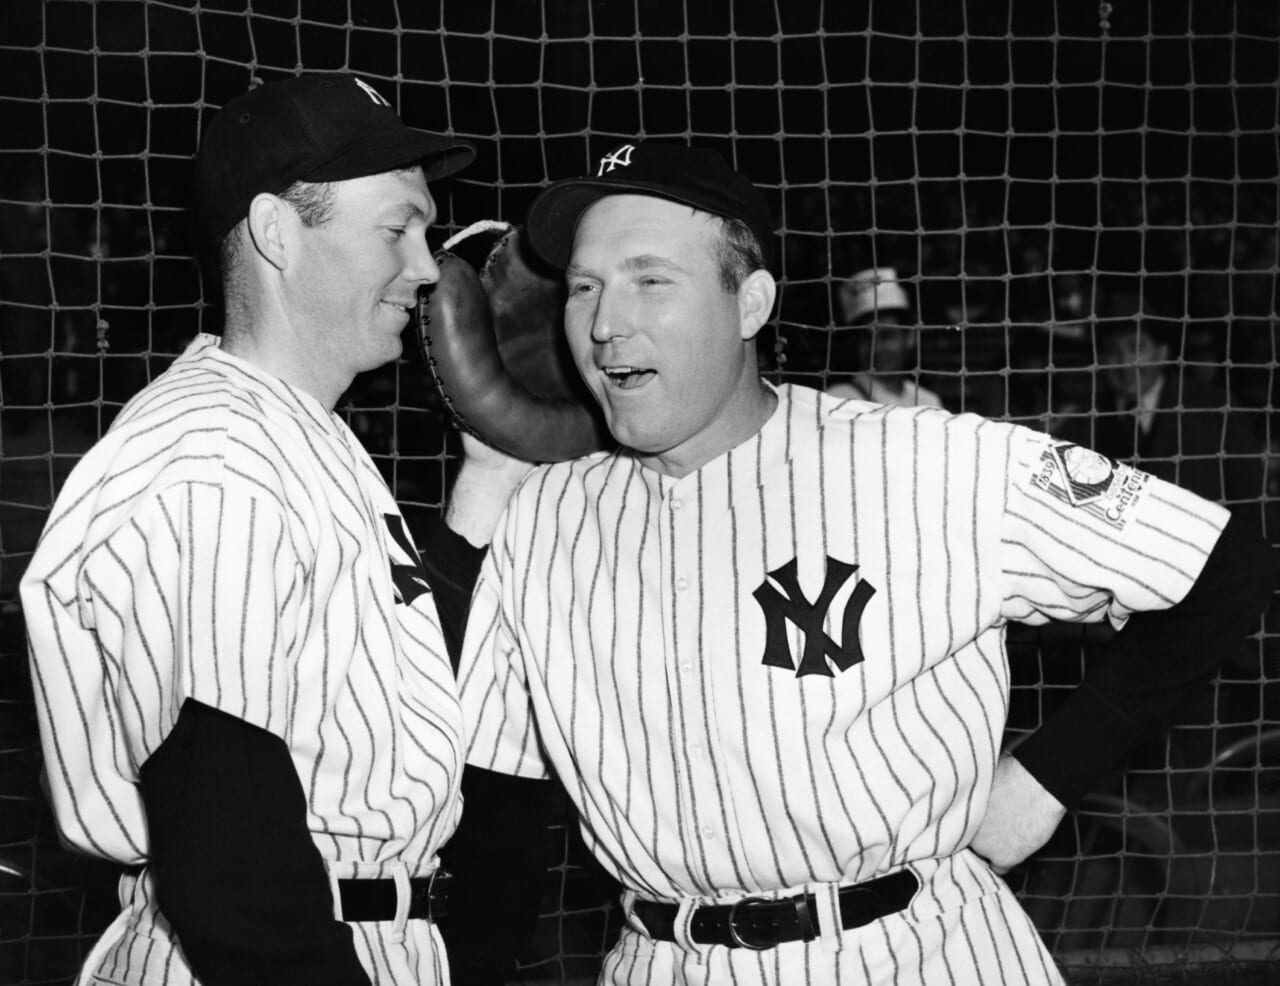 New York Yankees History: What Yankee pitcher aided his win by hitting a Walk-Off Homer?